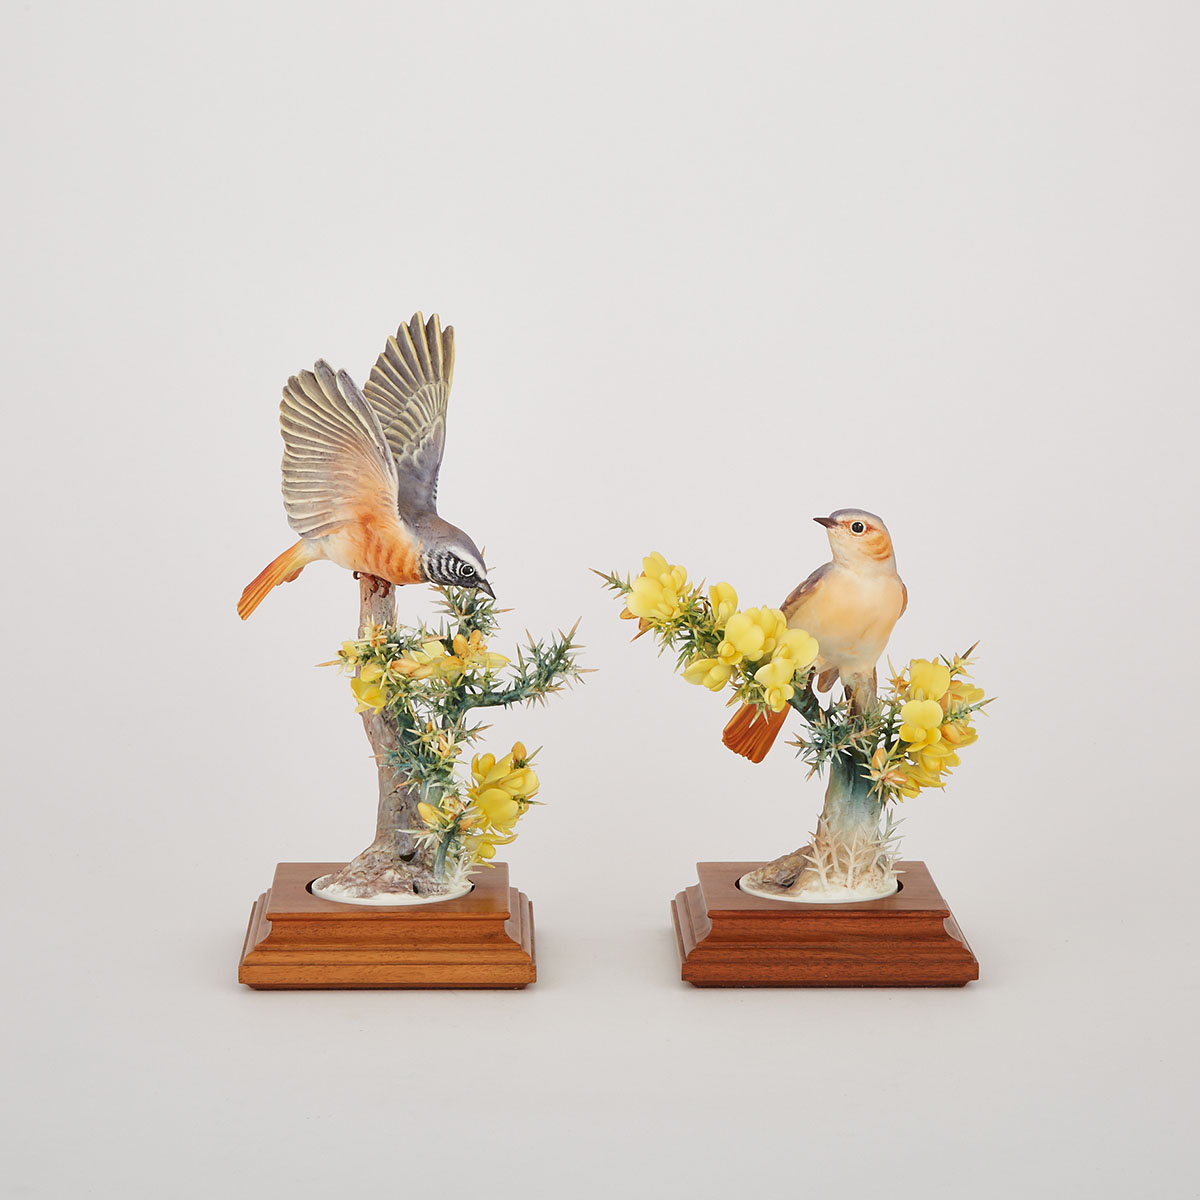 Pair of Royal Worcester ‘Redstart and Gorse’ Bird Models, Dorothy Doughty, 1968